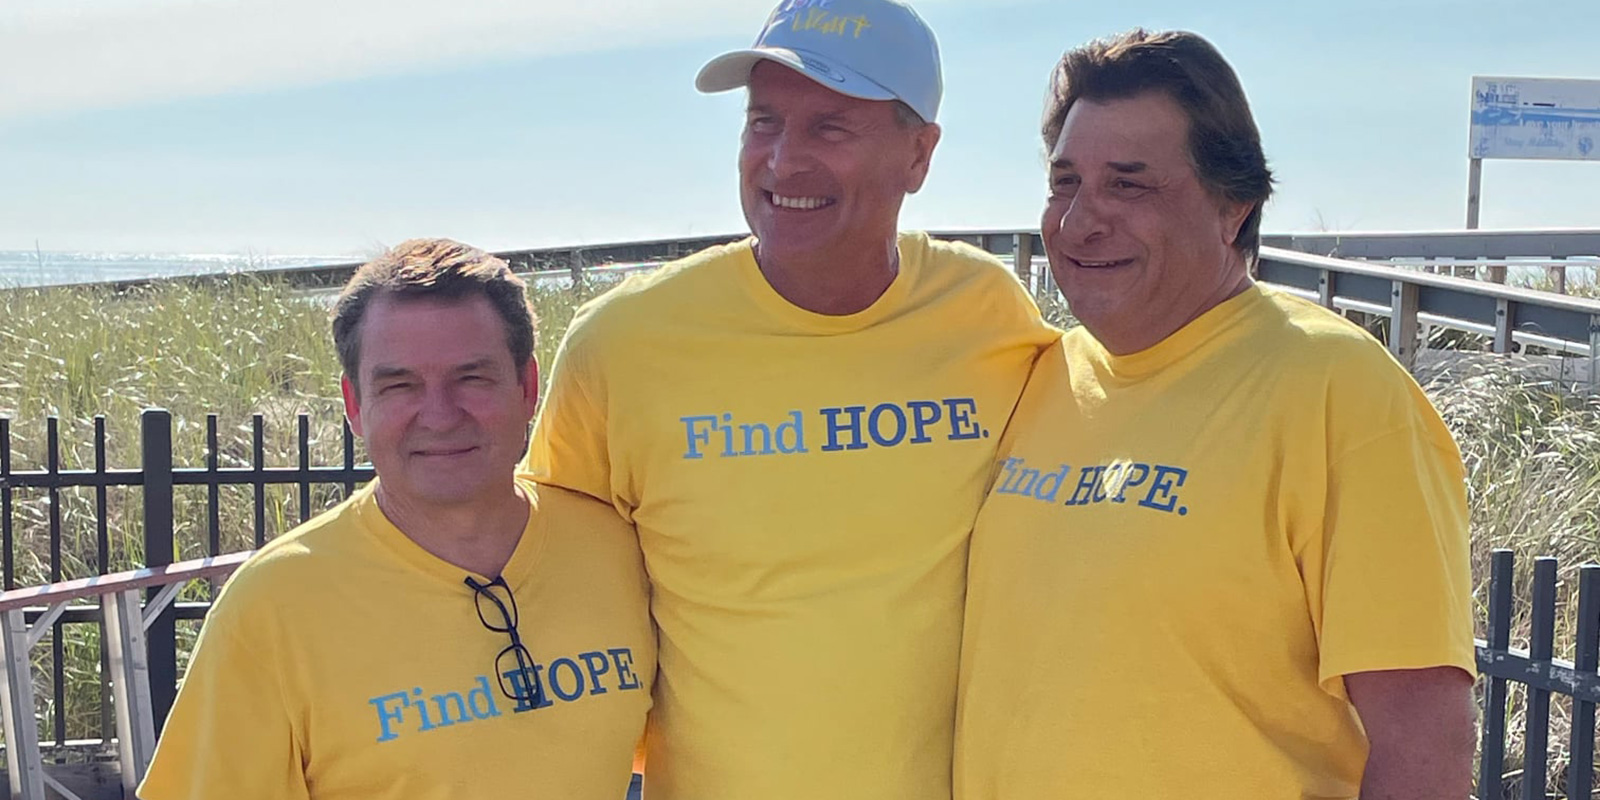 HOPE Sheds Light makes great strides in 2021, looks to 2022 with hope